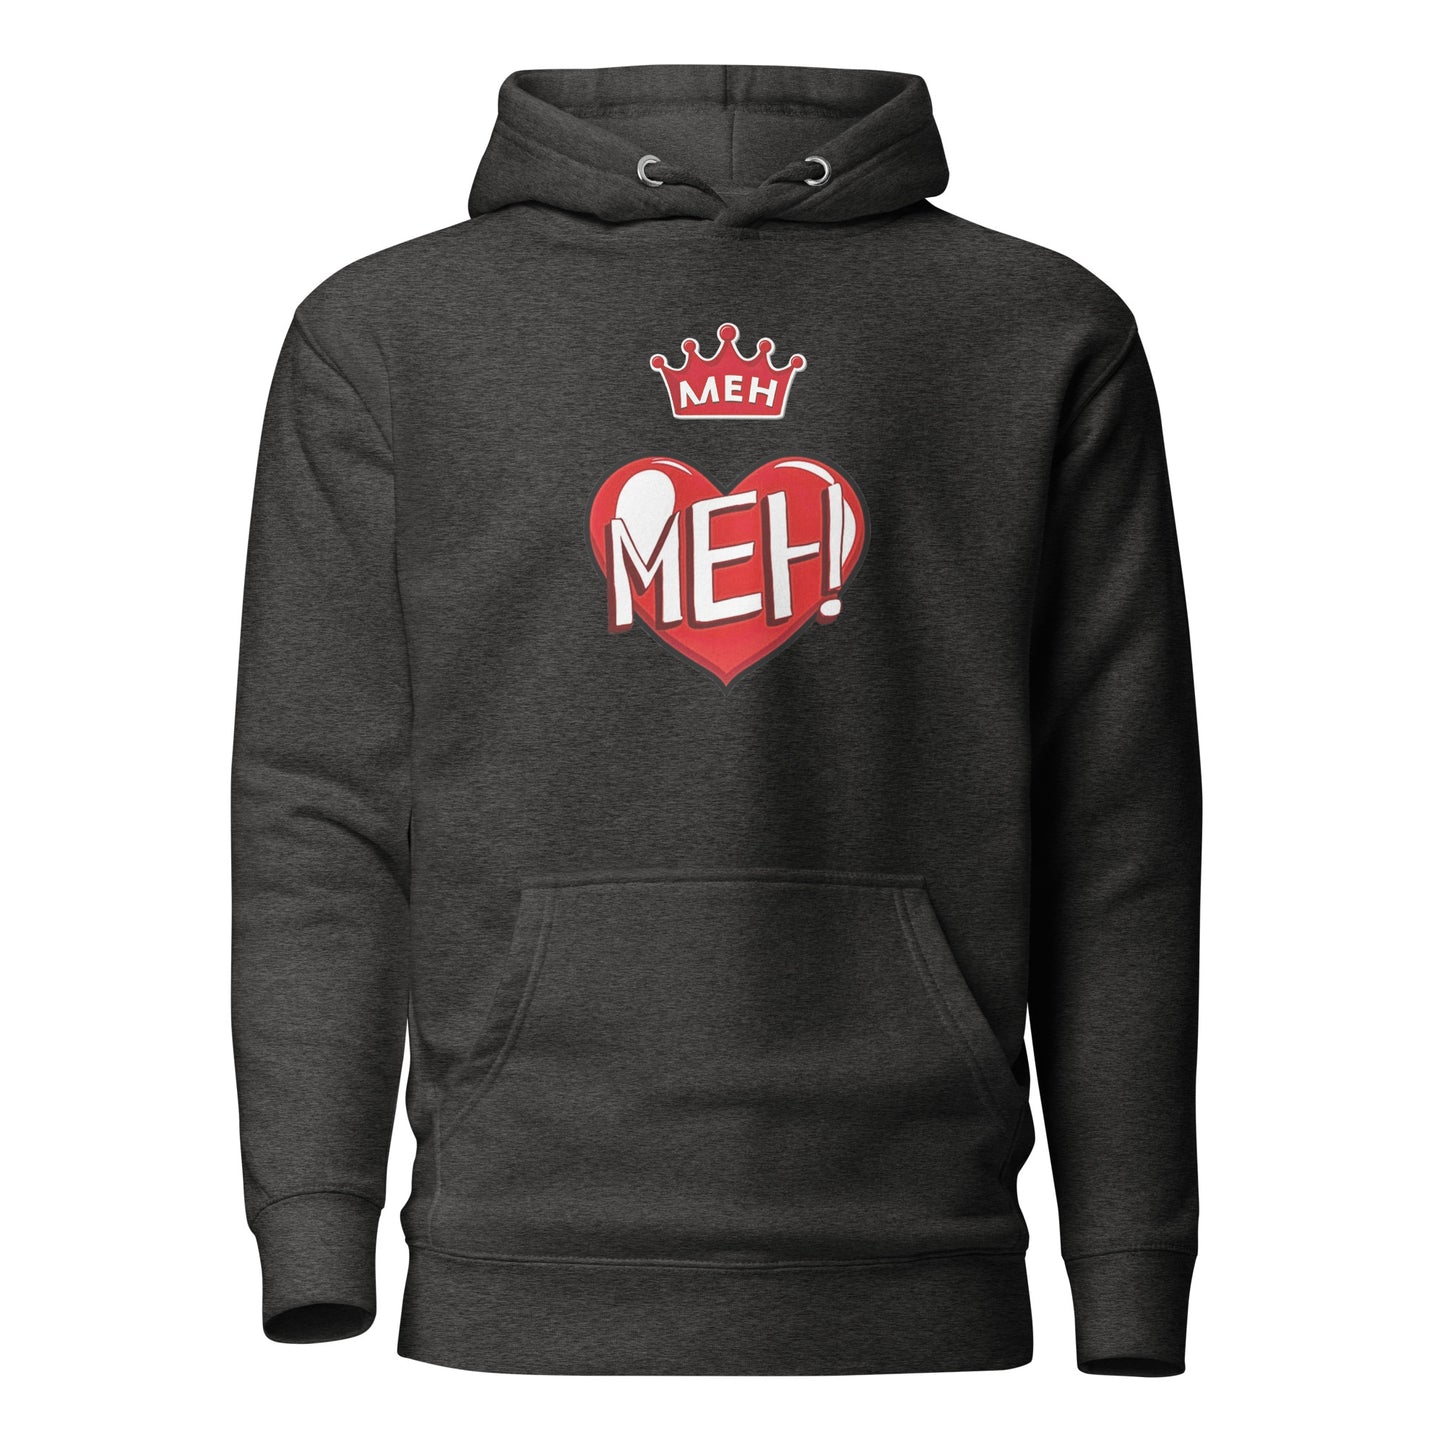 Meh Love Valentines Day, For loved ones gifts, valentines gifts, Hoodie for men and women, unisex Hoodies, Love "Meh" Hoodies, with Crown love hoodies for men and women, Comfy Weather